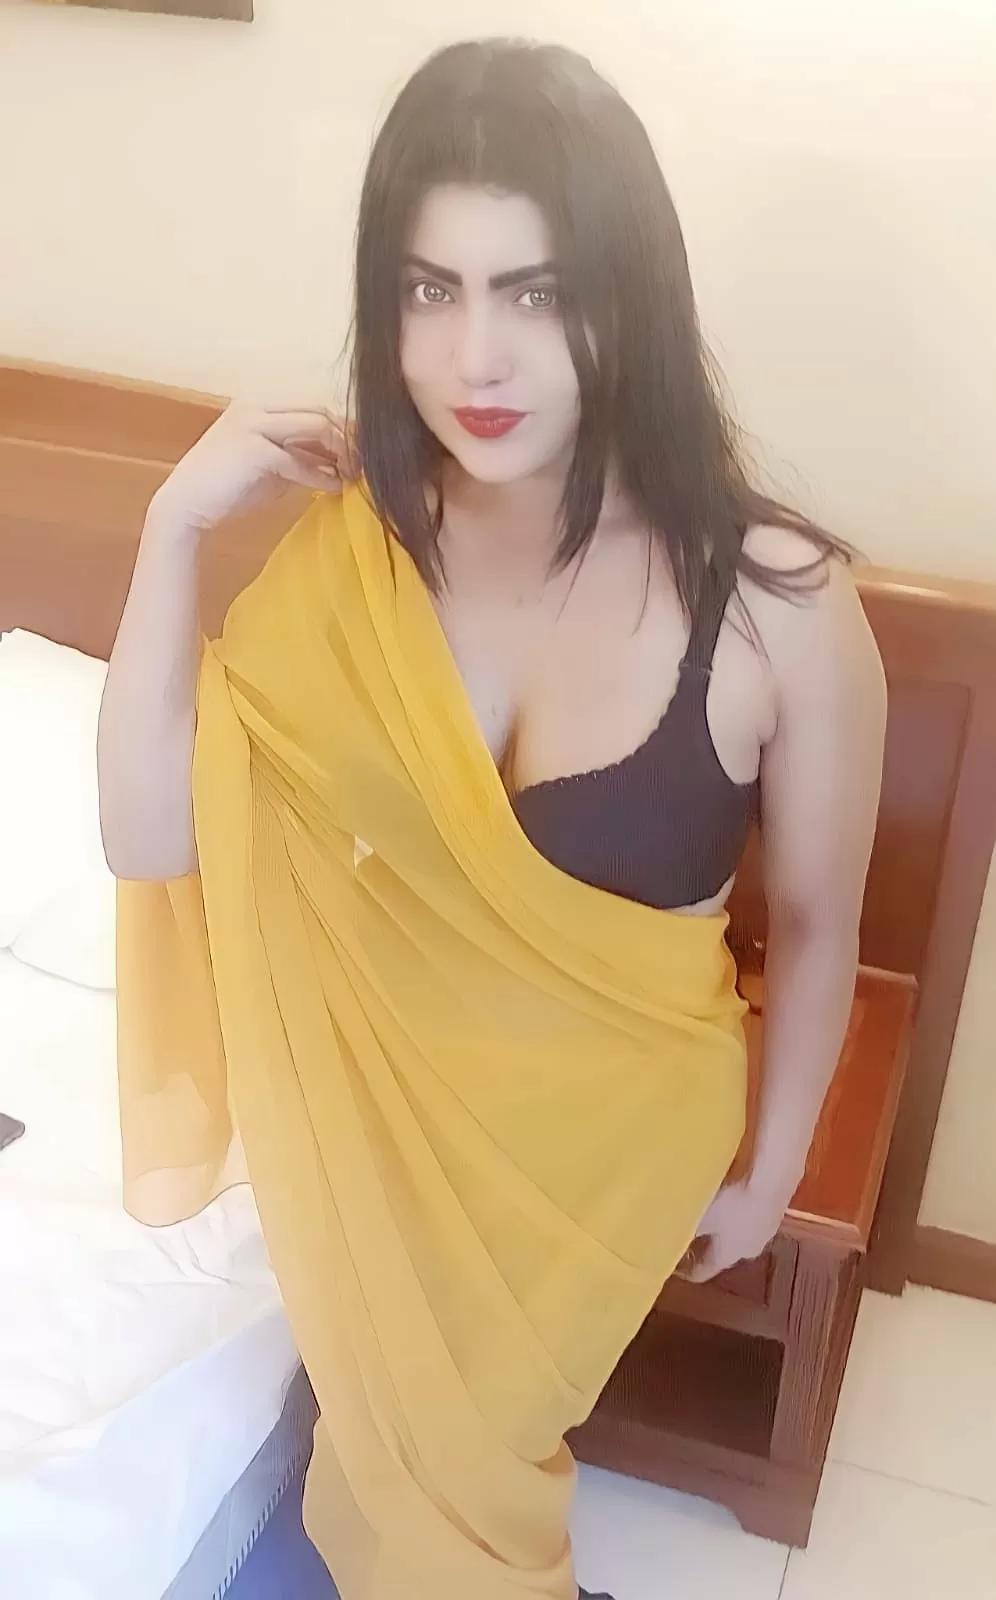 Mumbai Escort Service | ₹,4000 With Room Free Home Delivery